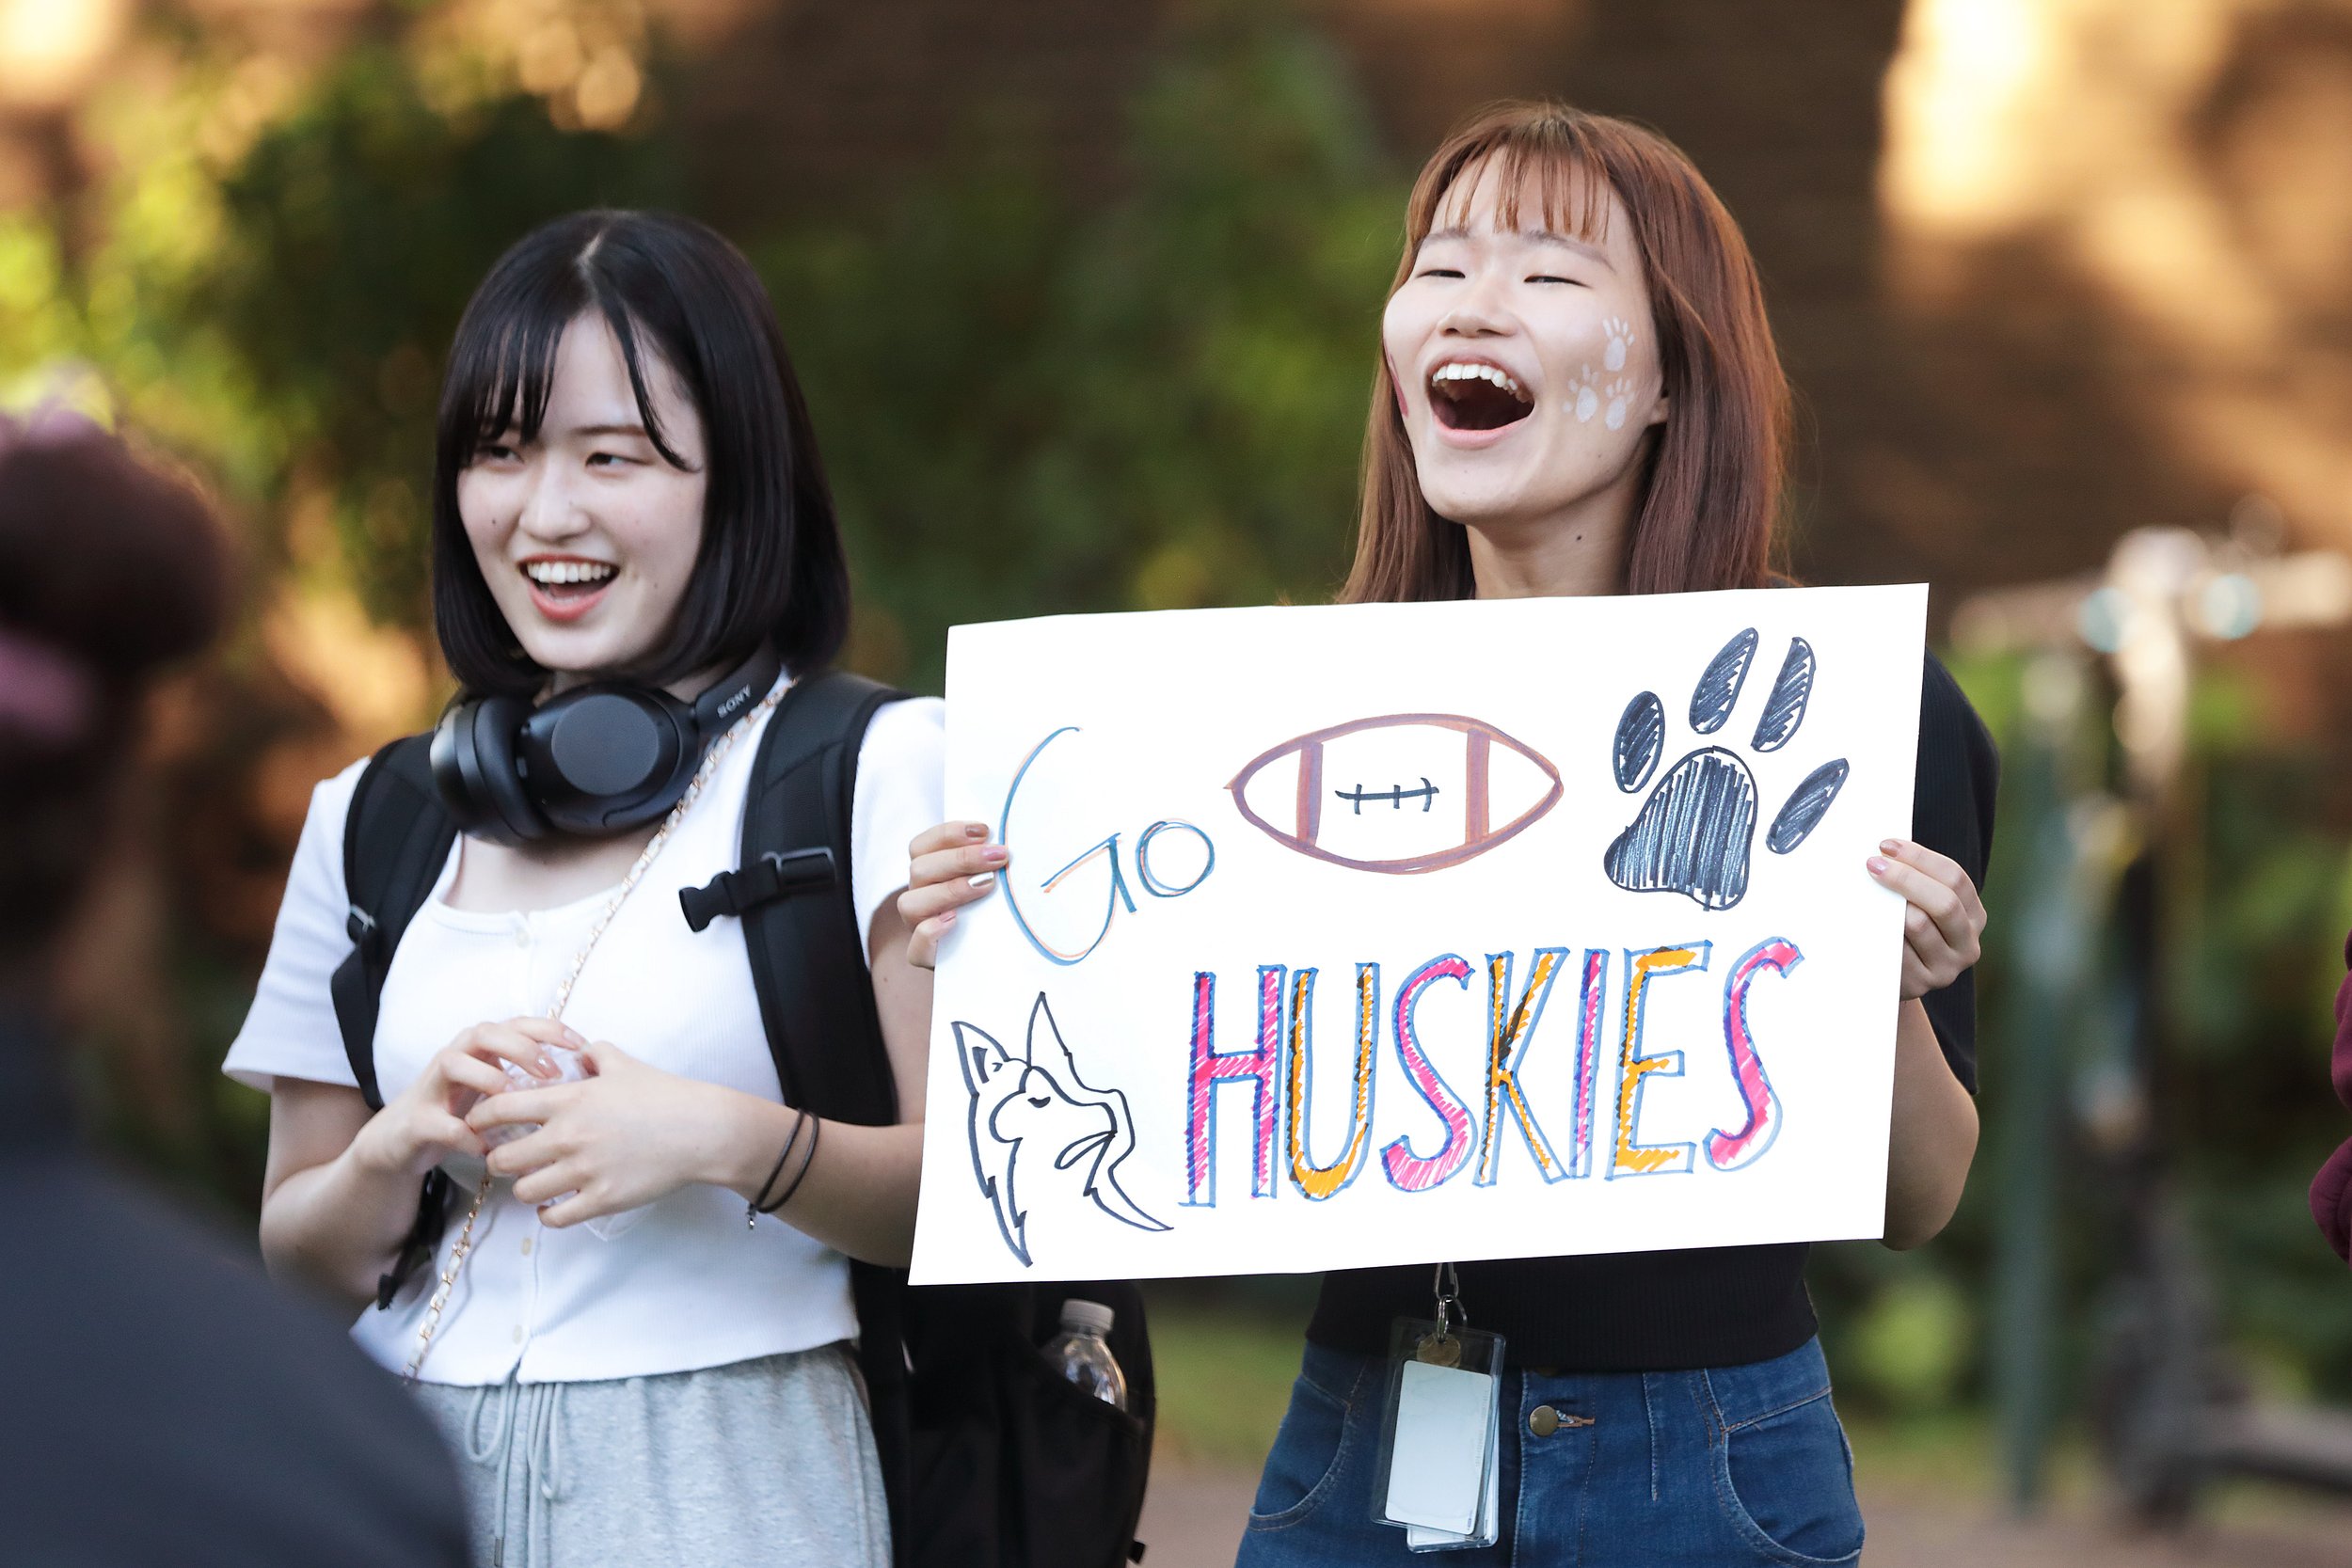 Two fans cheering on the huskies with a sign